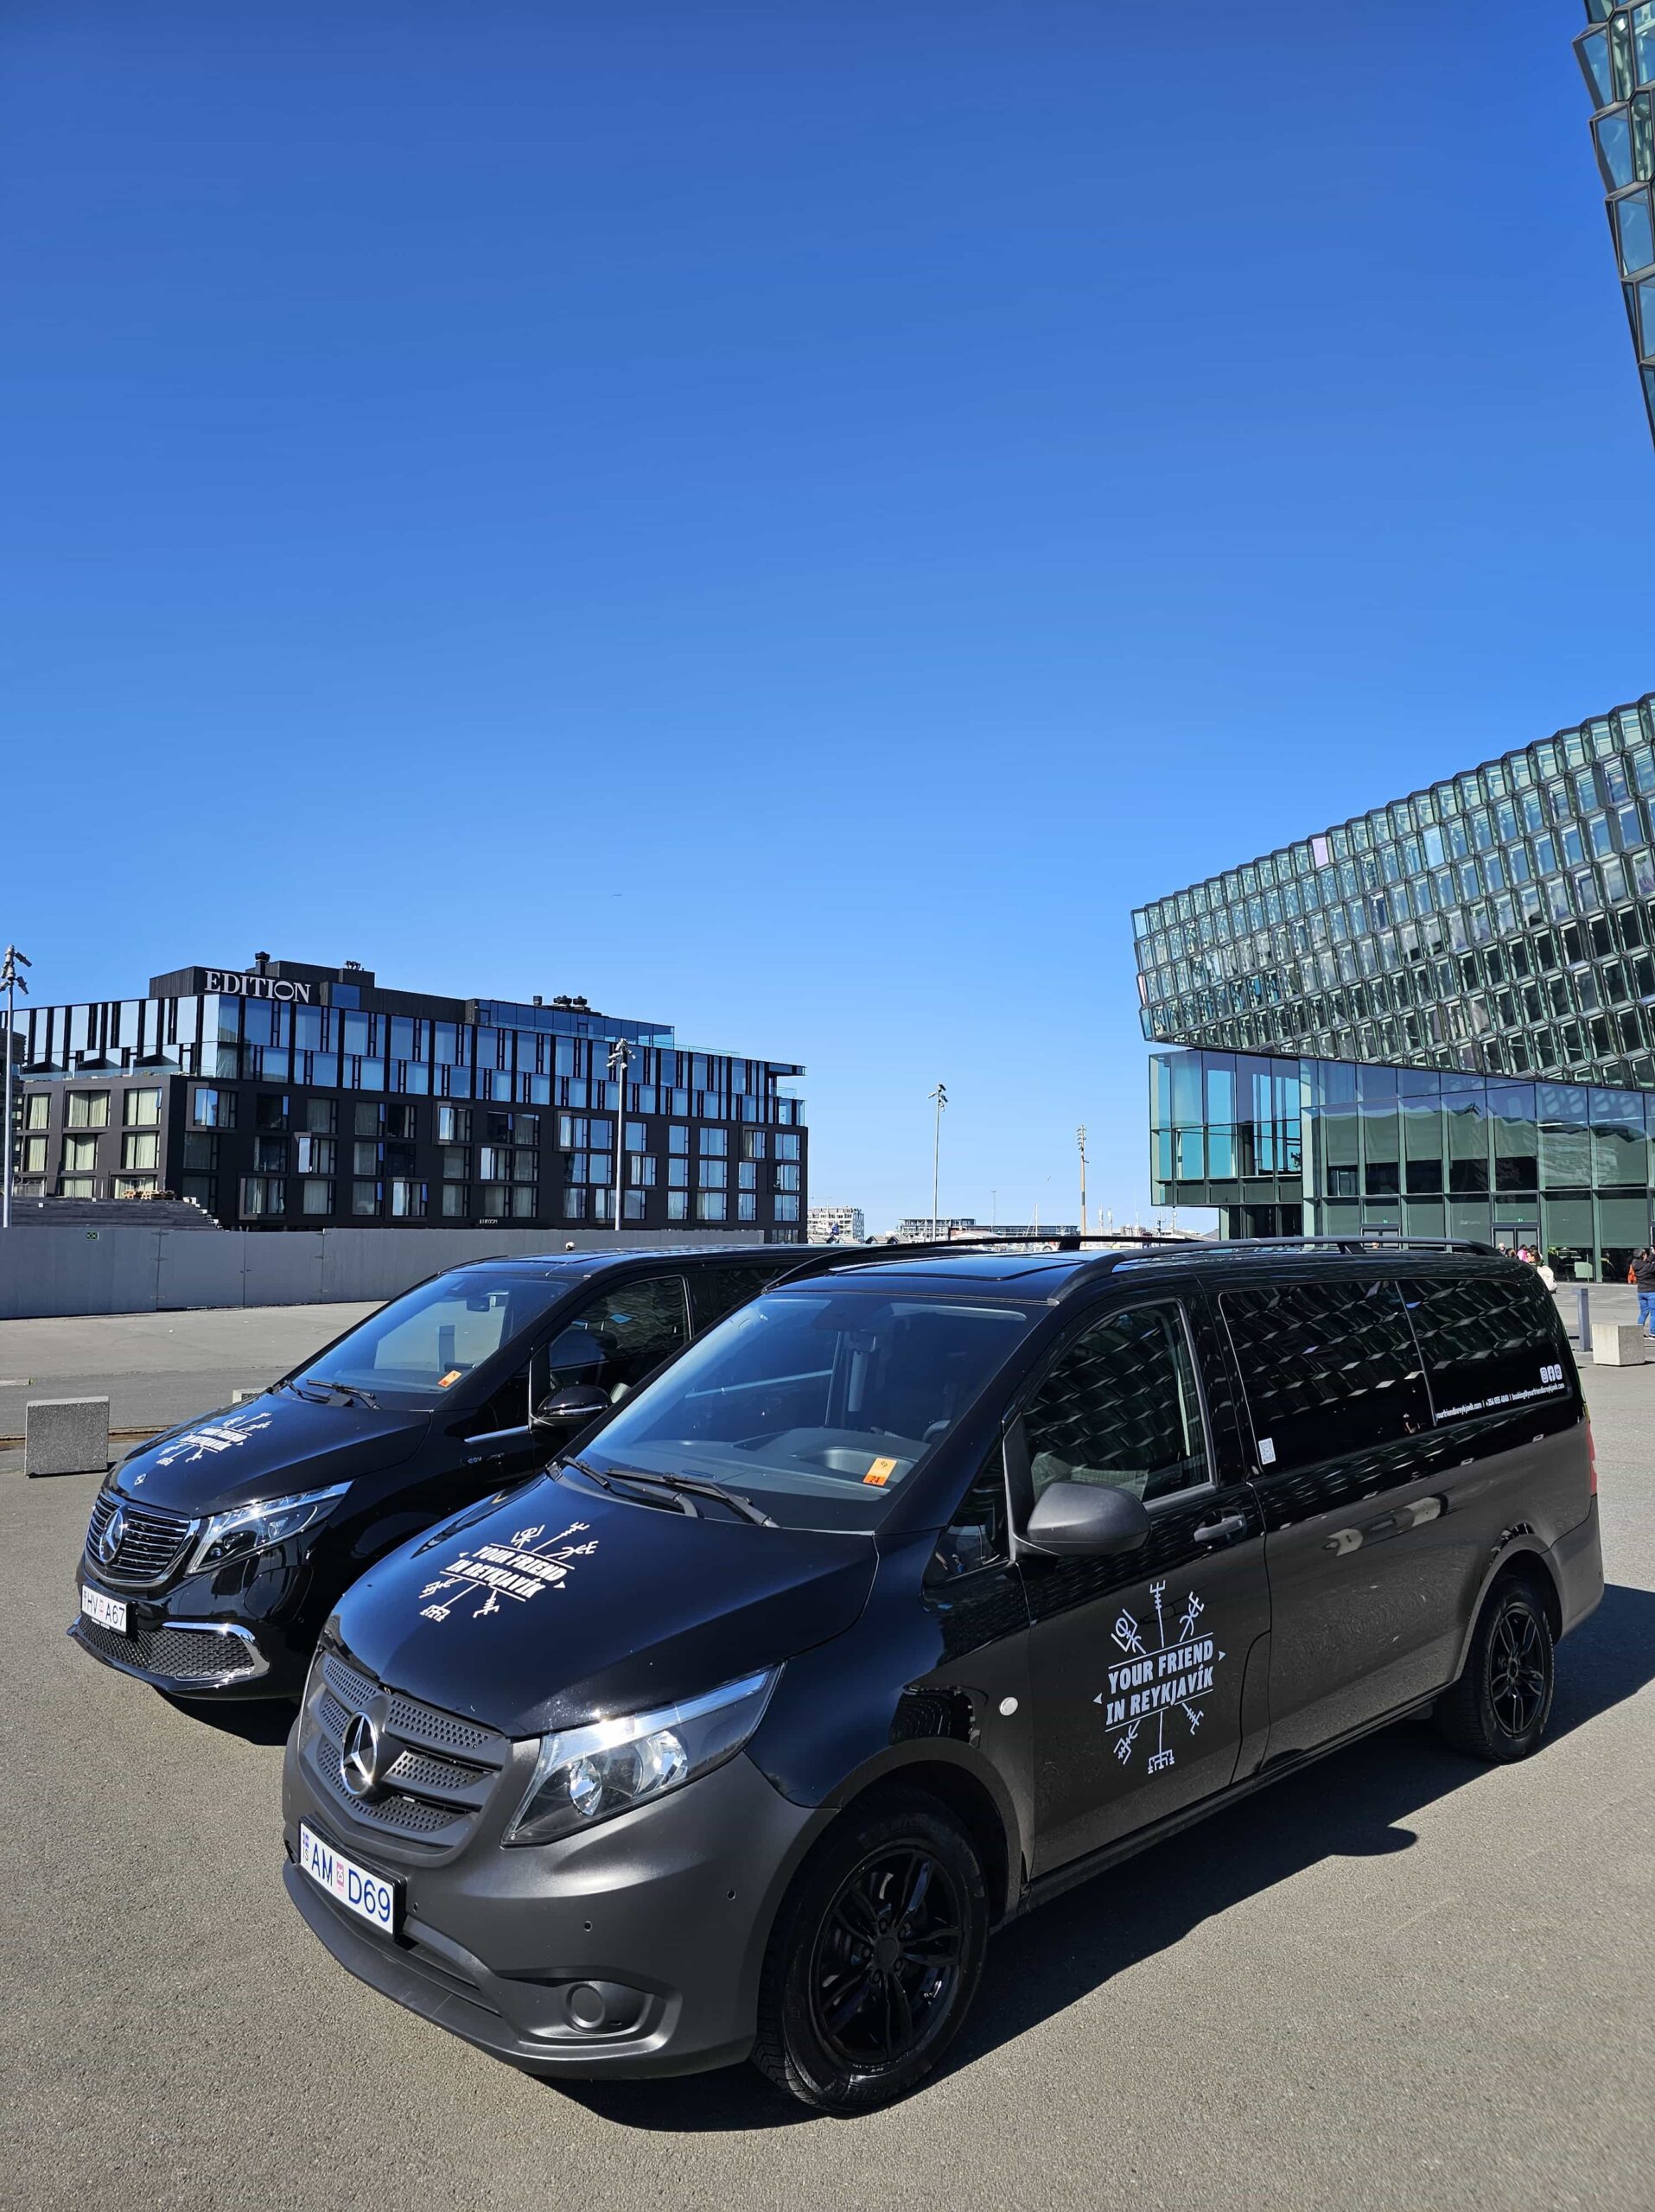 Two Tour Vehicles from Your Friend in Reykjavik parked in front of the Harpa Concert Hall in Reykjavik